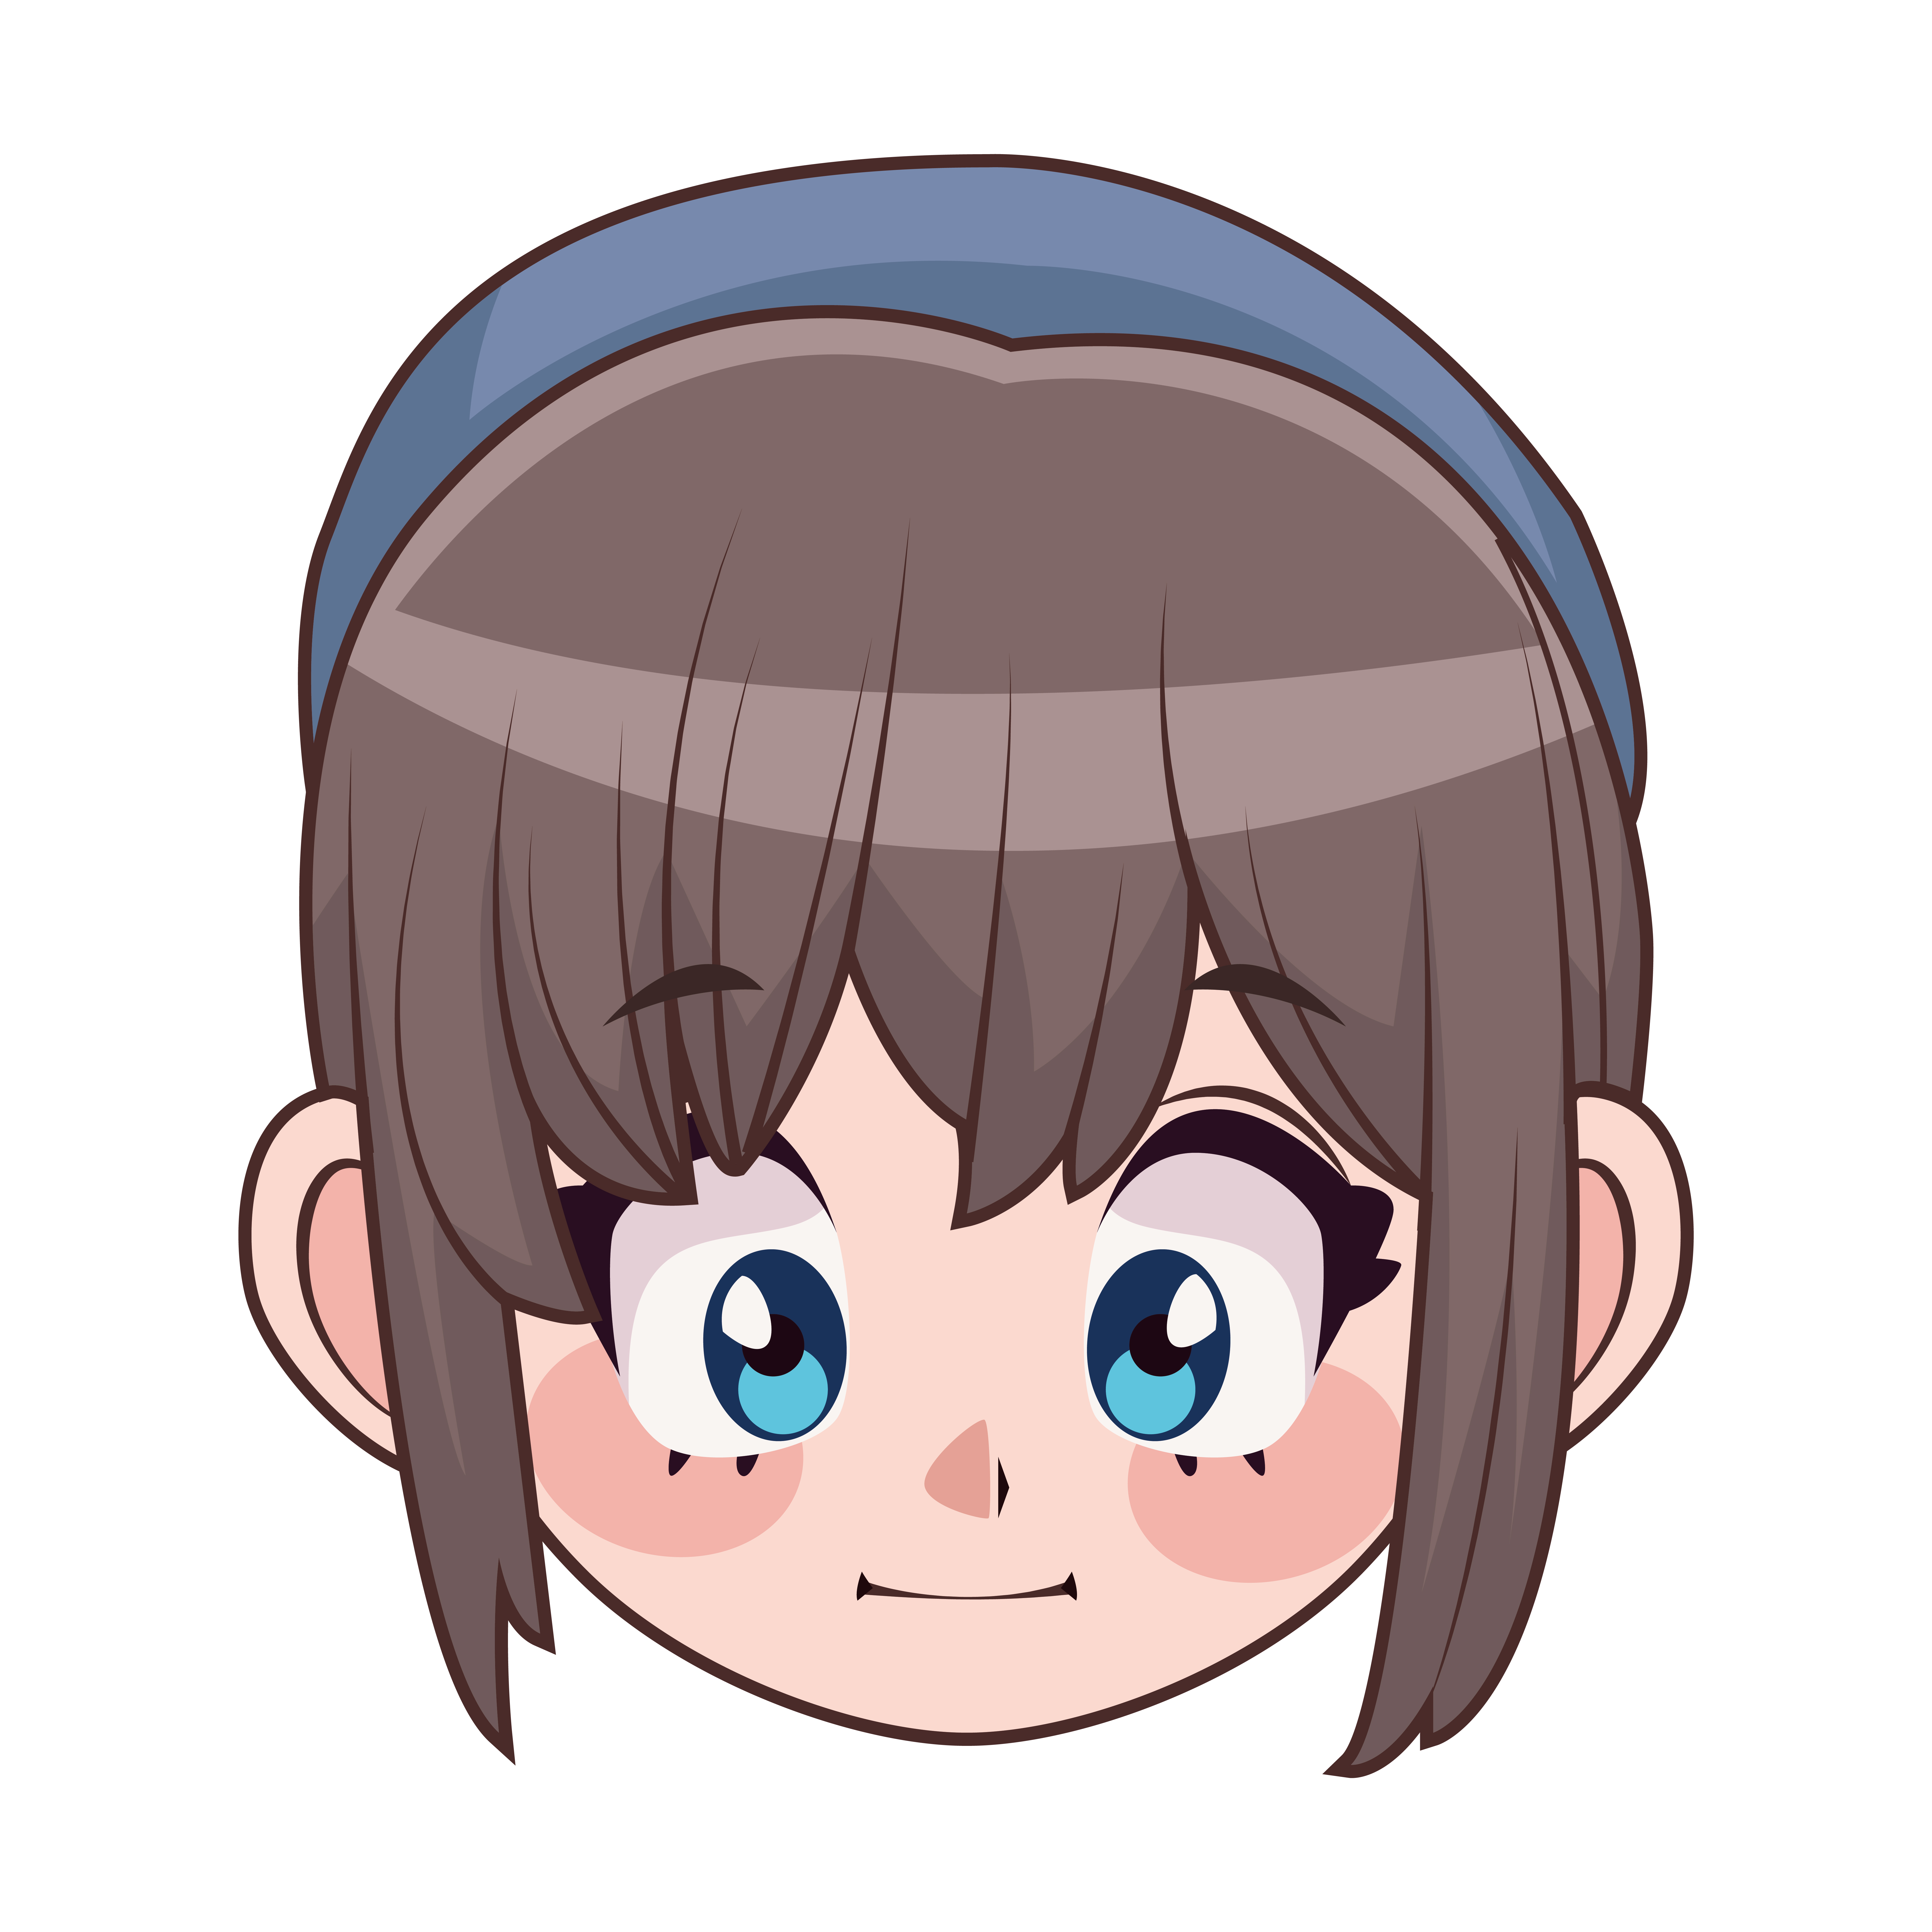 Anime Eyes And Cute Image  Short Haired Anime Girl Transparent PNG   500x707  Free Download on NicePNG